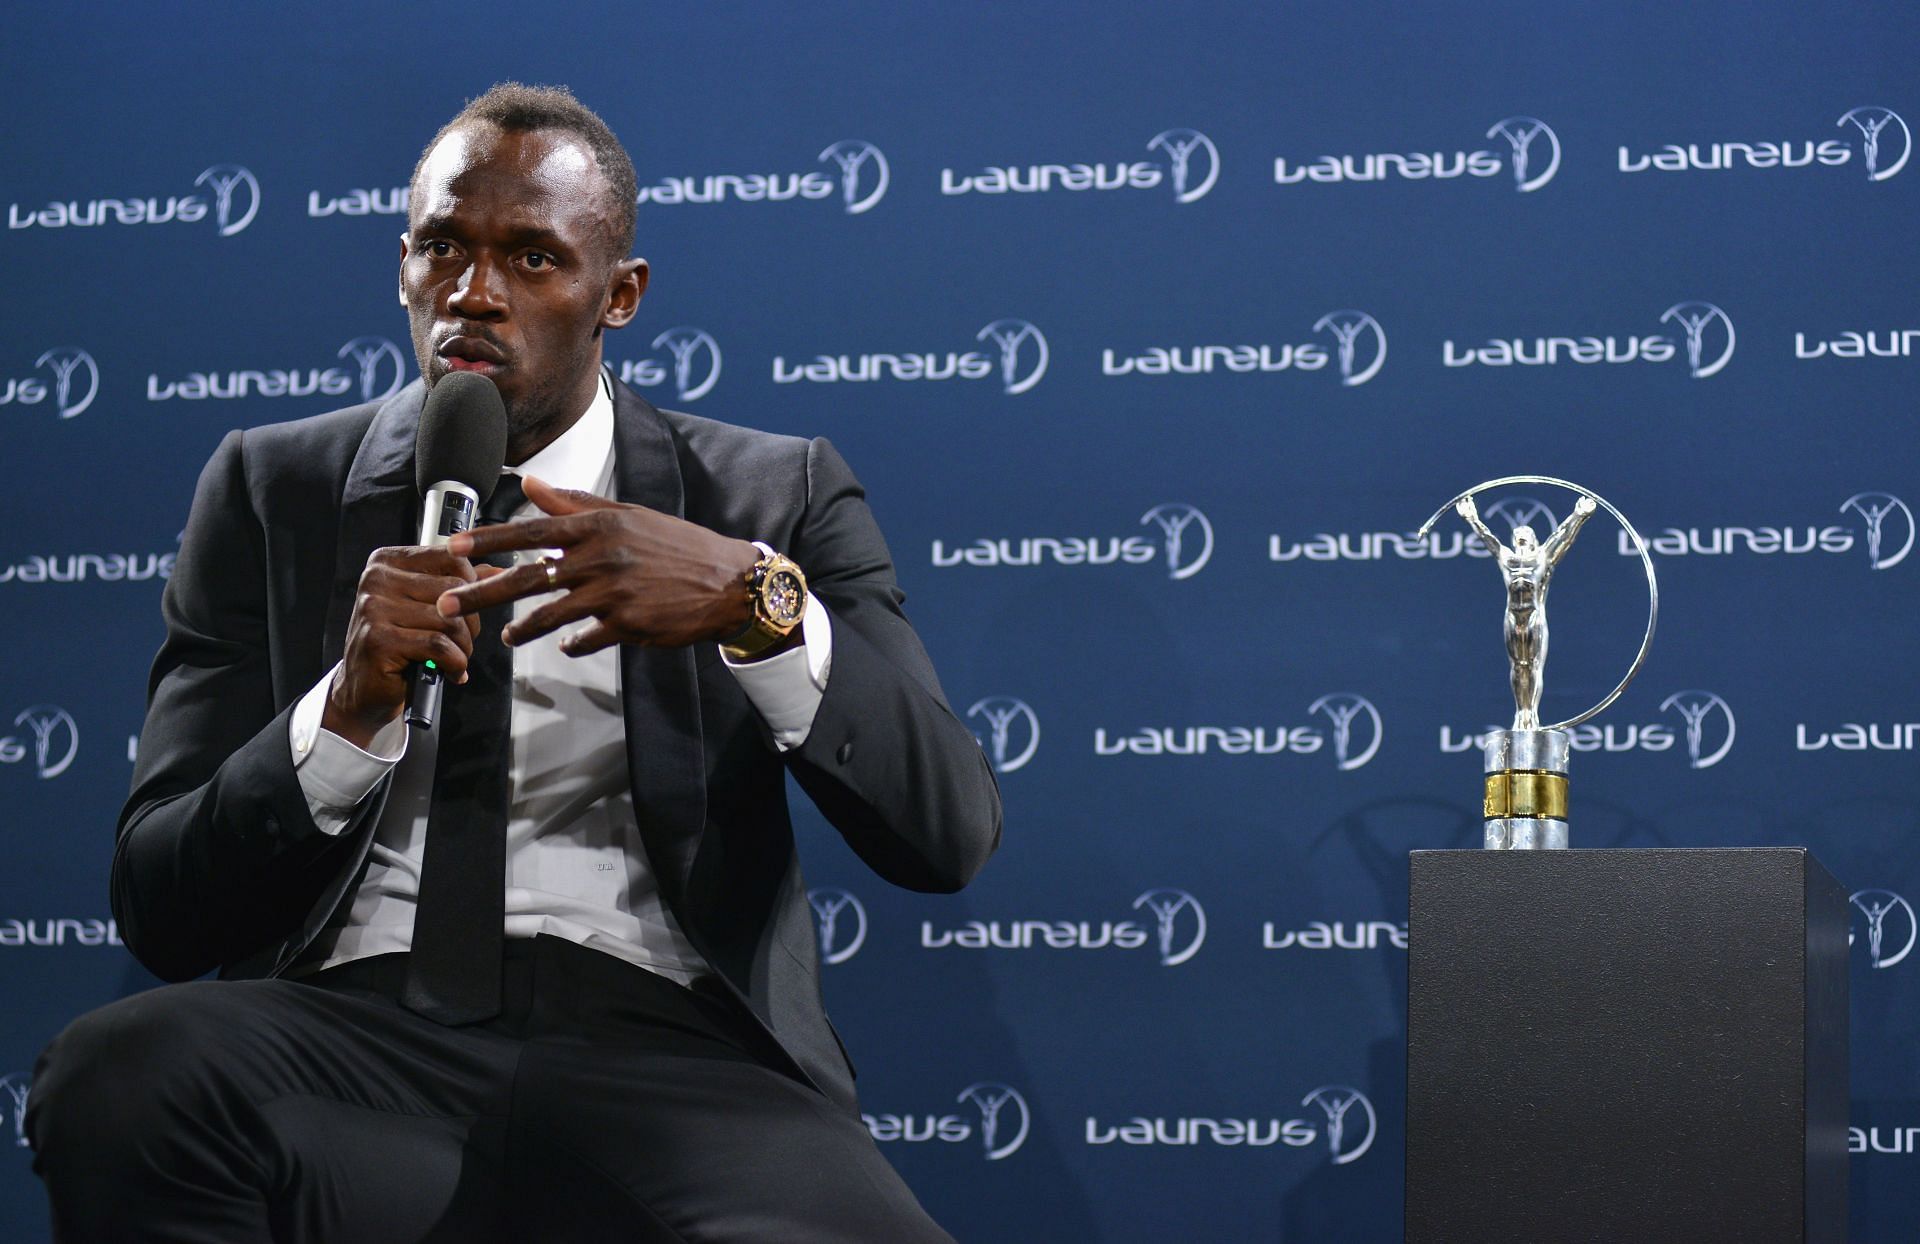 Winner of the Laureus World Sportsman of the Year Award Athlete Usain Bolt of Jamaica speaks during the Winners Press Conference during the 2017 Laureus World Sports Awards at the Salle des Etoiles, Sporting Monte Carlo on February 14, 2017 in Monaco, Monaco. (Photo by Christian Alminana/Getty Images for Laureus)